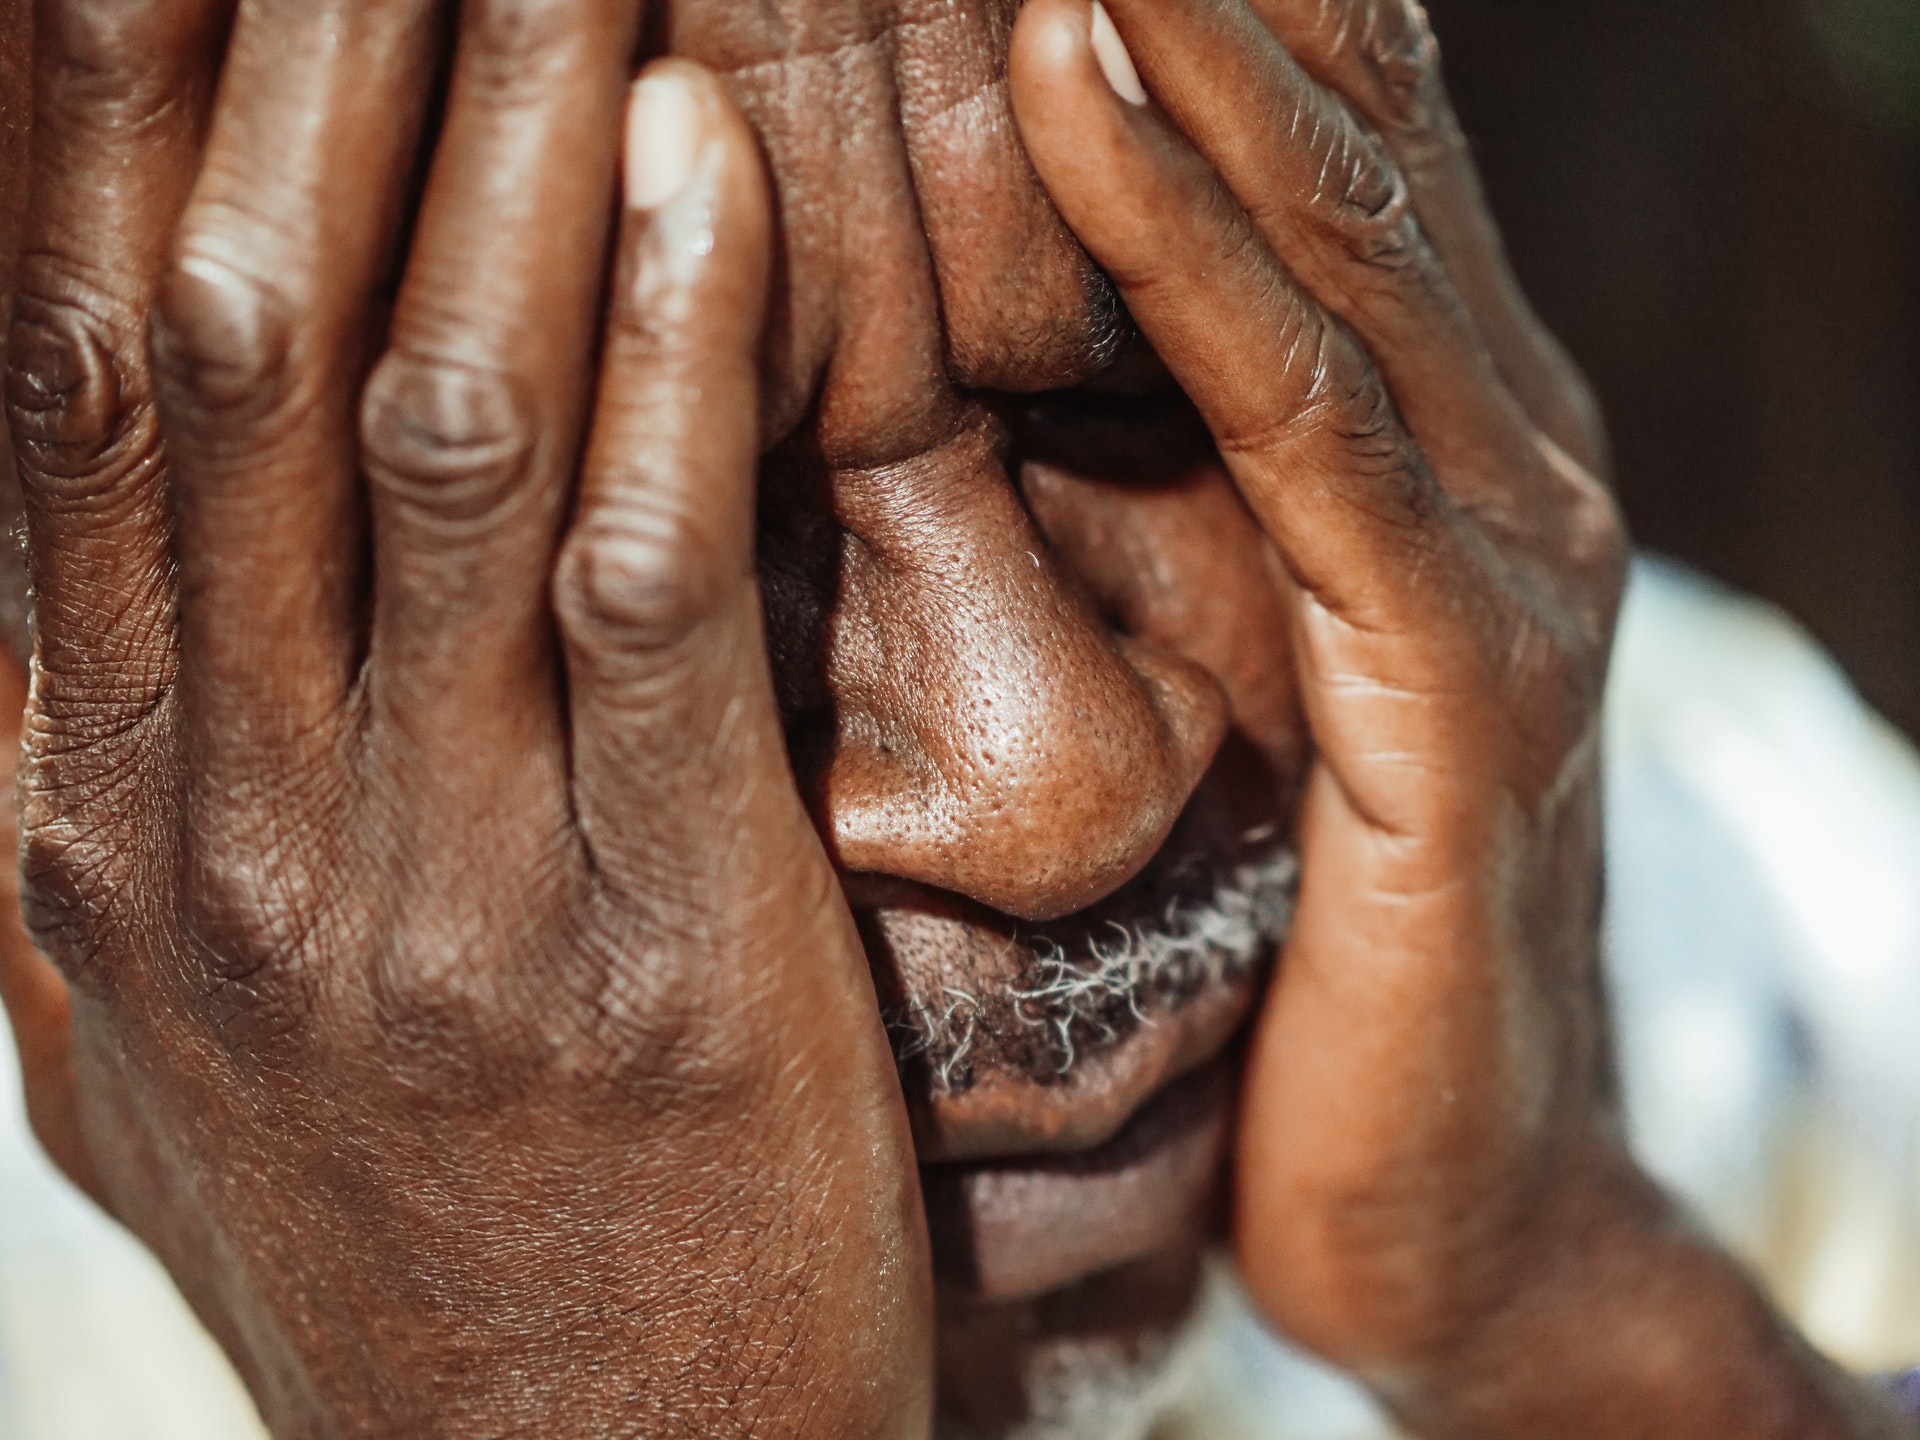 Ophthalmologic examinations can help identify elderly people at risk for dementia